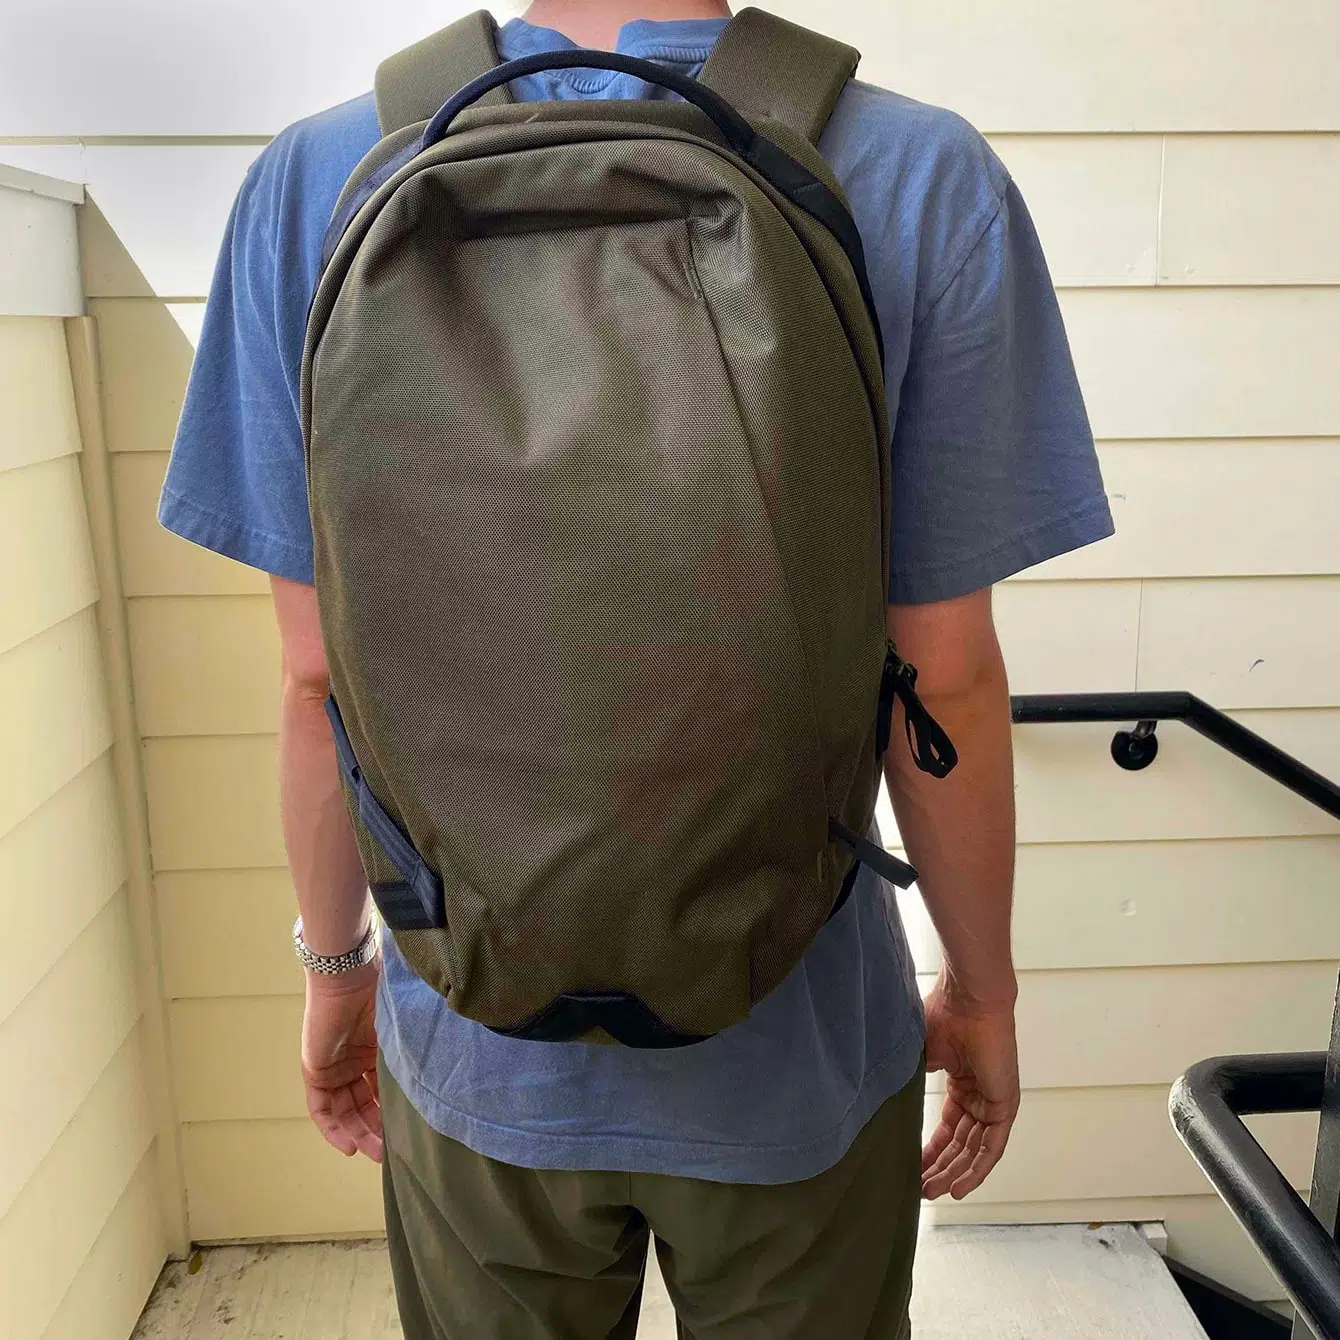 Able Carry Daily Backpack Review